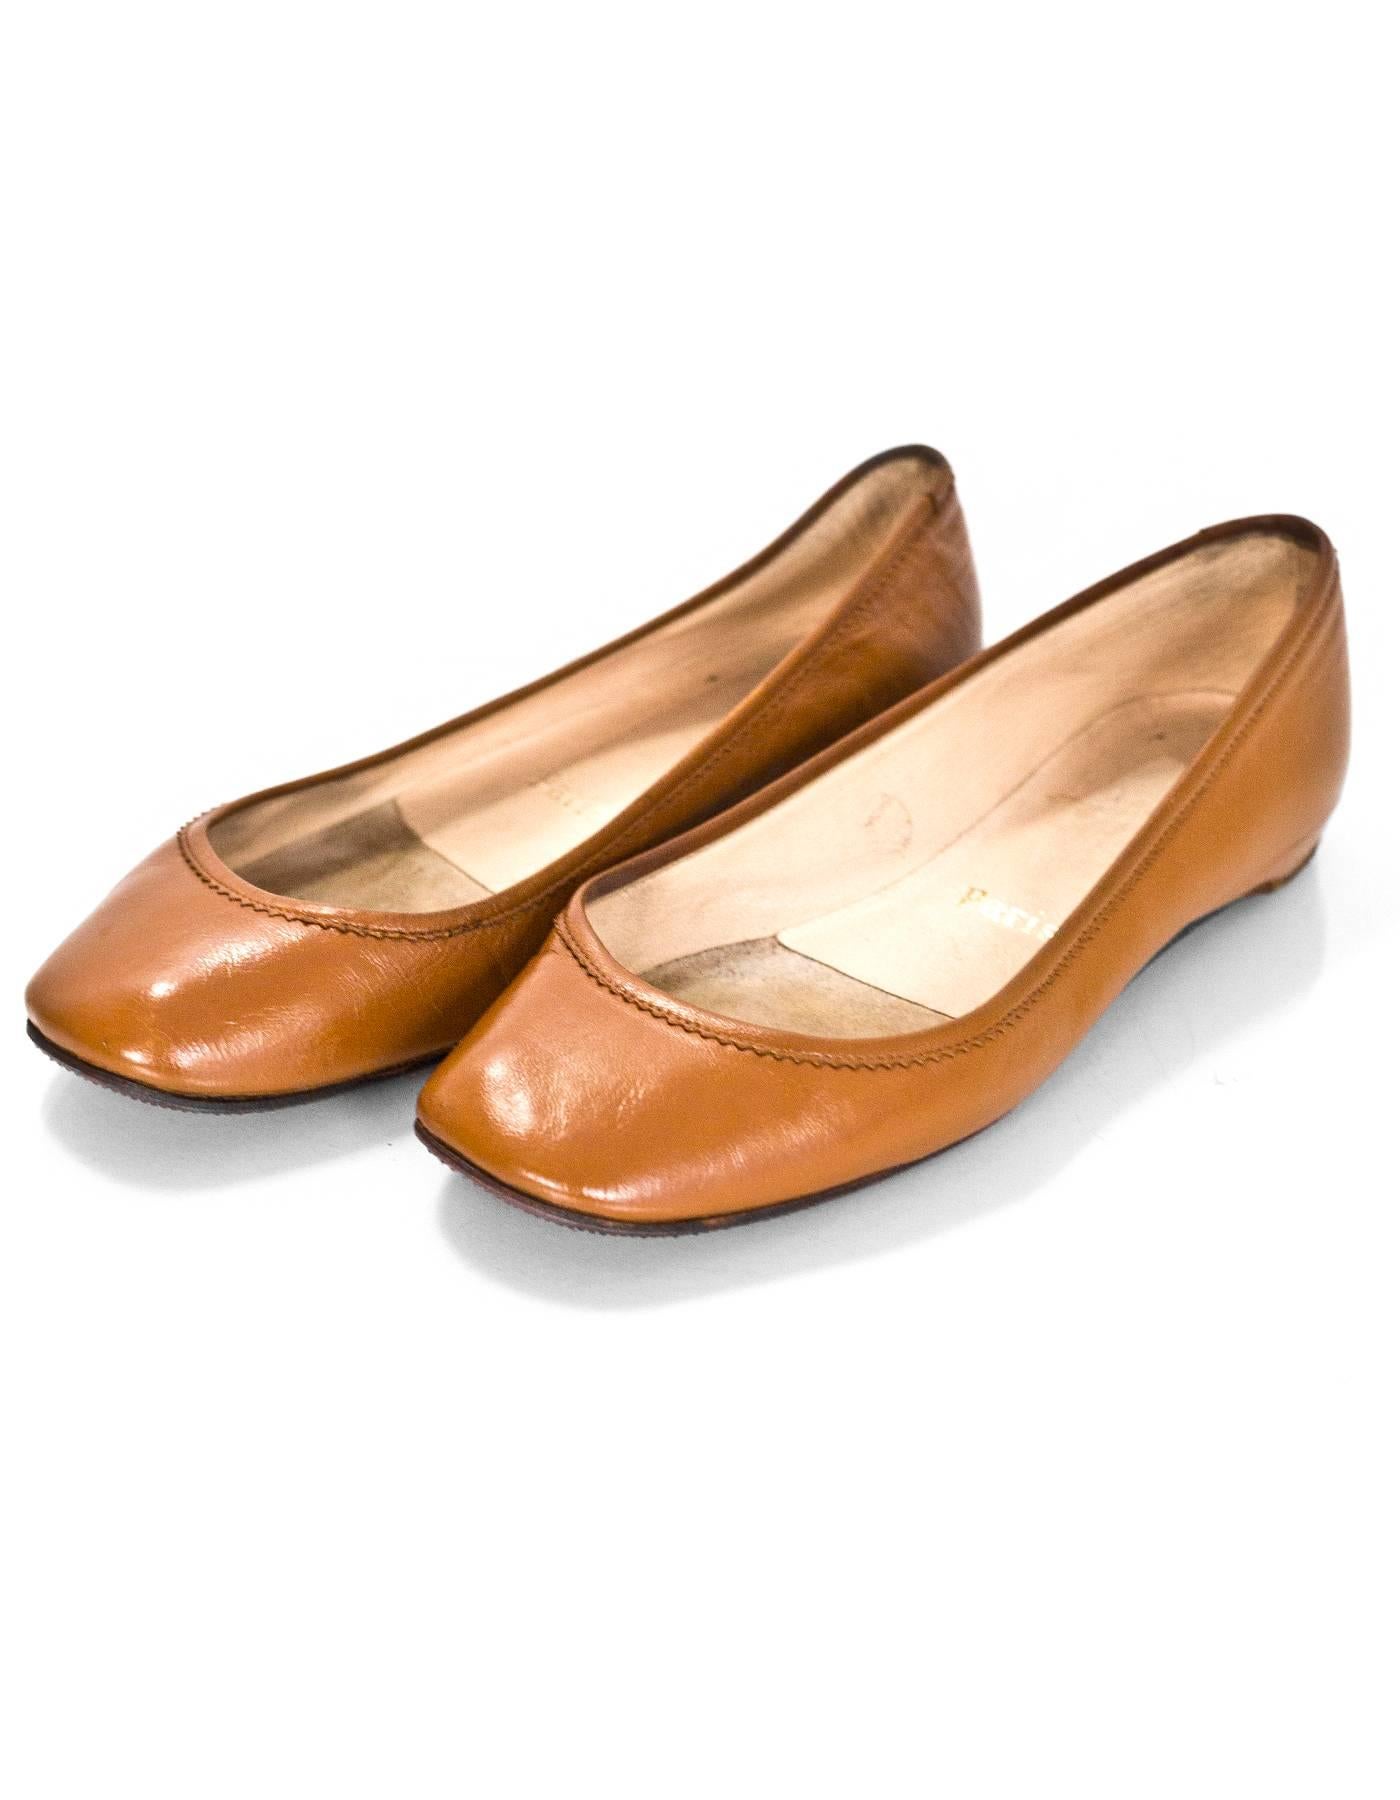 Christian Louboutin Tan Leather Flats Sz 36

Made In: Italy
Color: Tan
Materials: Leather
Closure/Opening: Slide on
Sole Stamp: Christian Louboutin Made in Italy 36
Overall Condition: Very good pre-owned condition with the exception of being